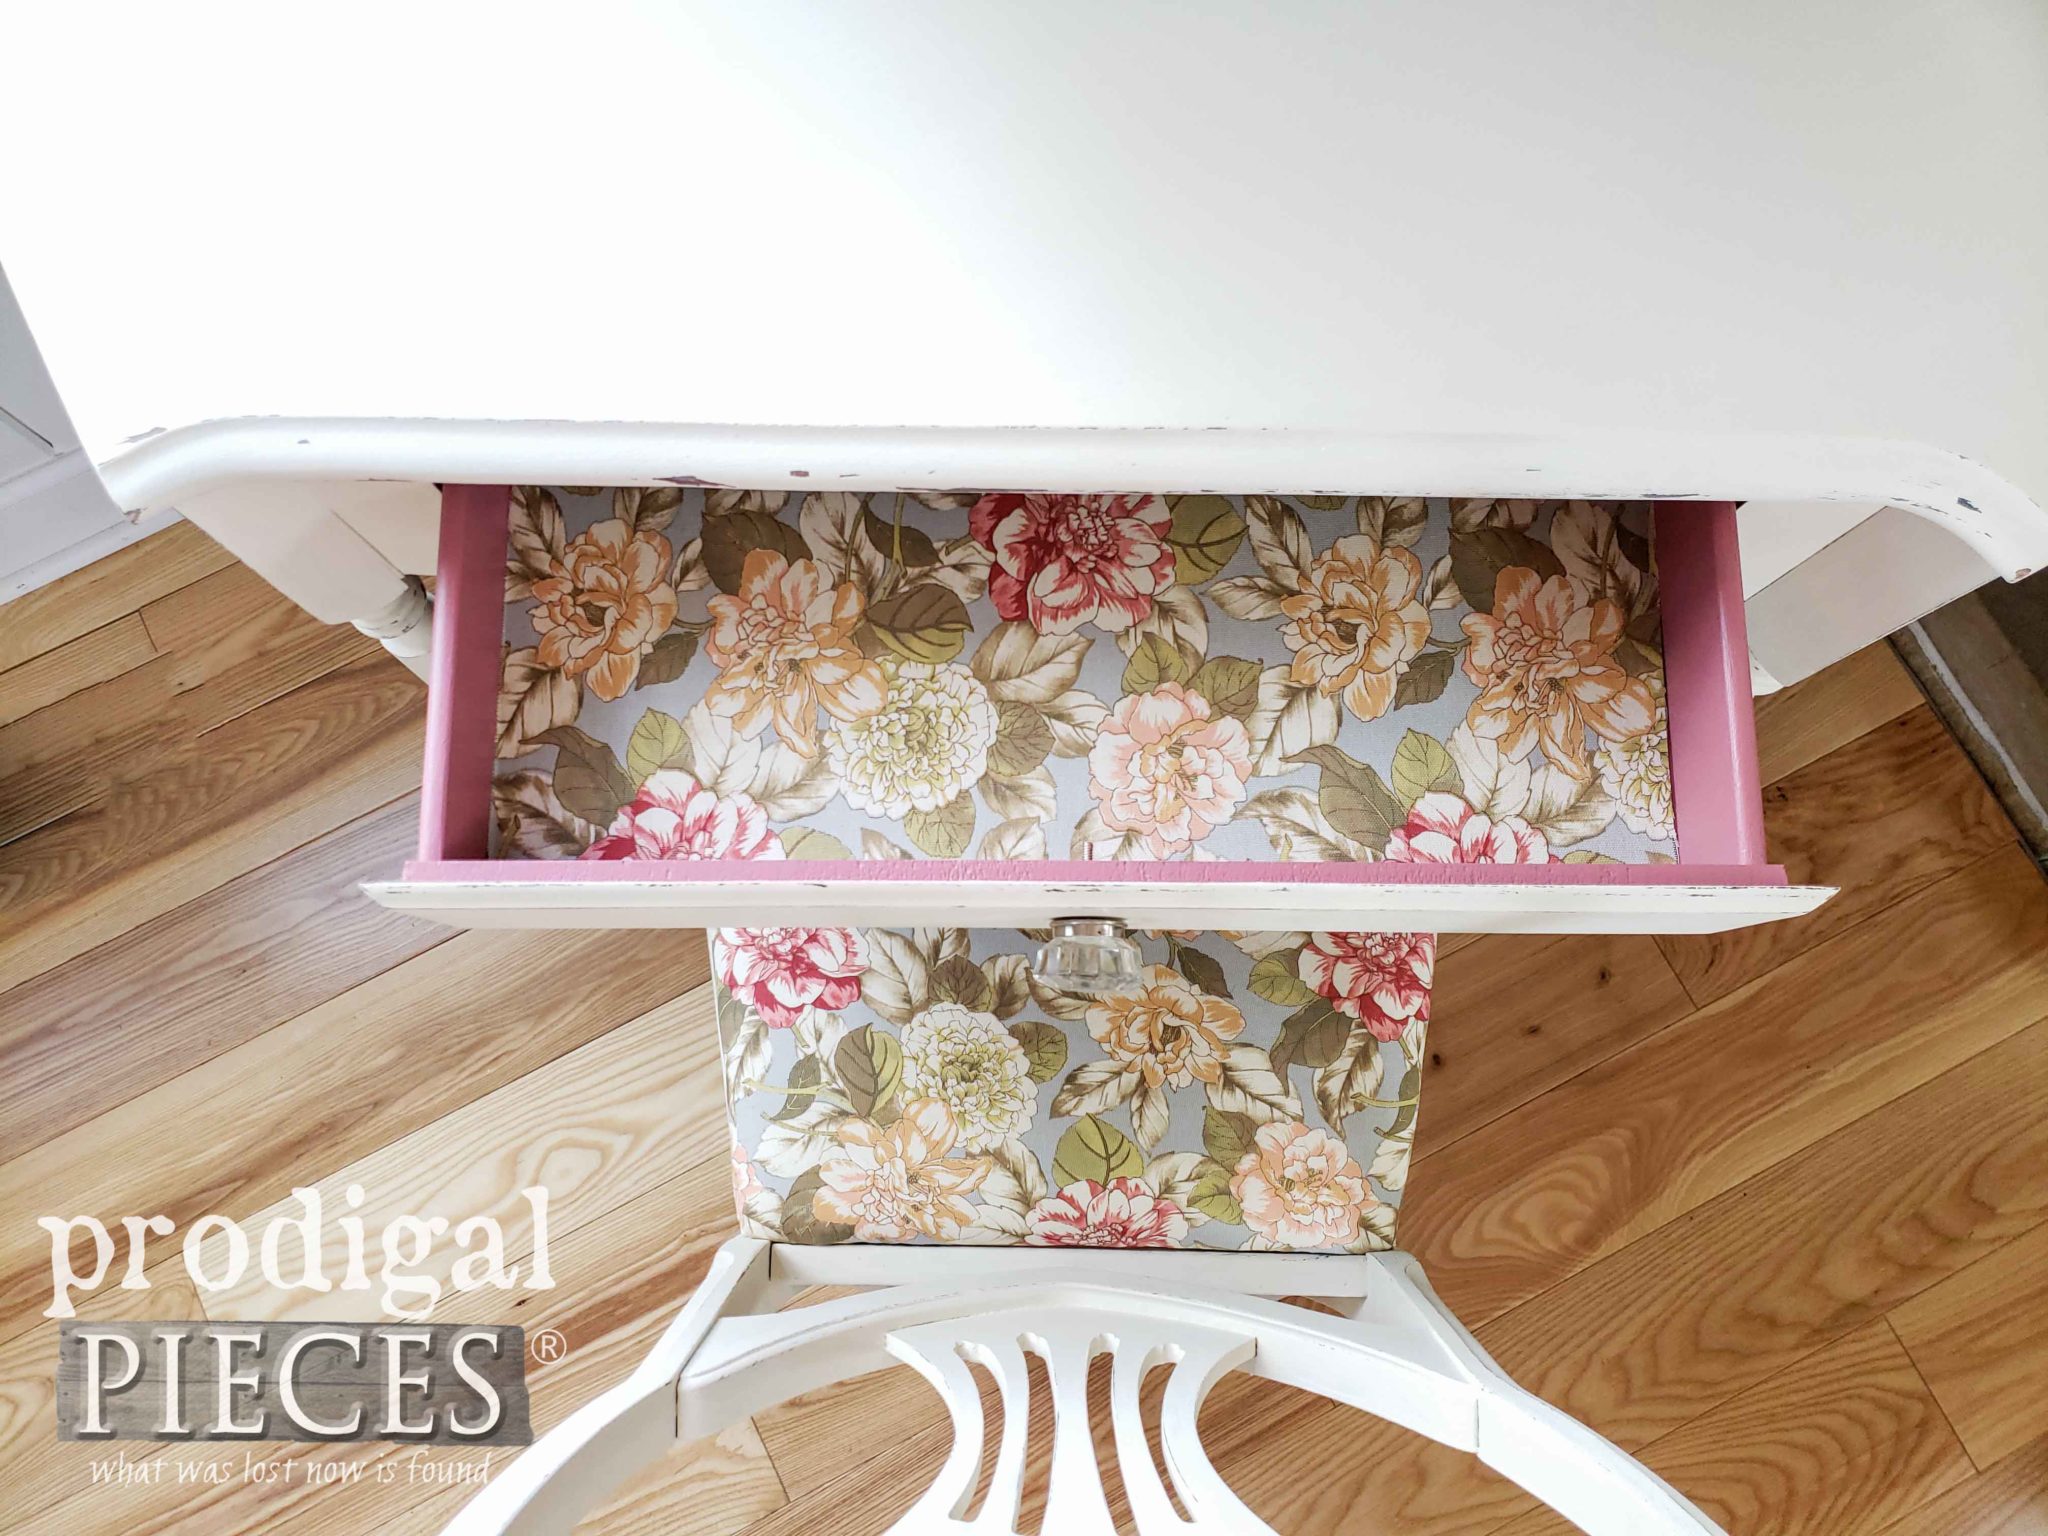 How to Line a Drawer with Fabric by Larissa of Prodigal Pieces | prodigalpieces.com #prodigalpieces #diy #furniture #vintage #home #homedecor